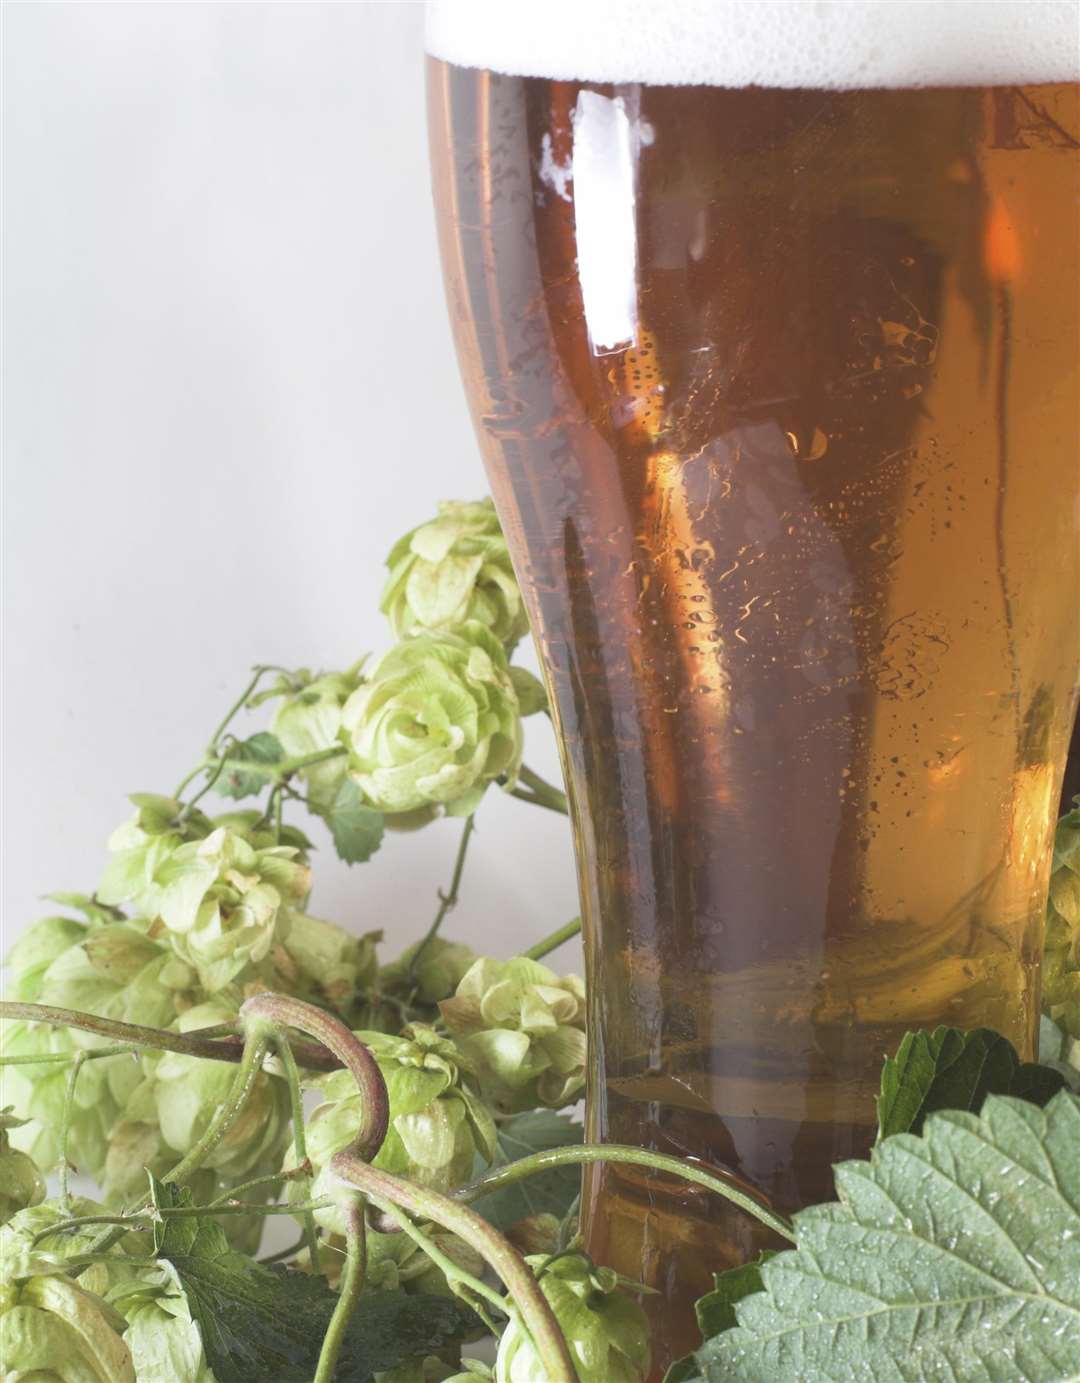 Get on the trail of Kentish hops and beer